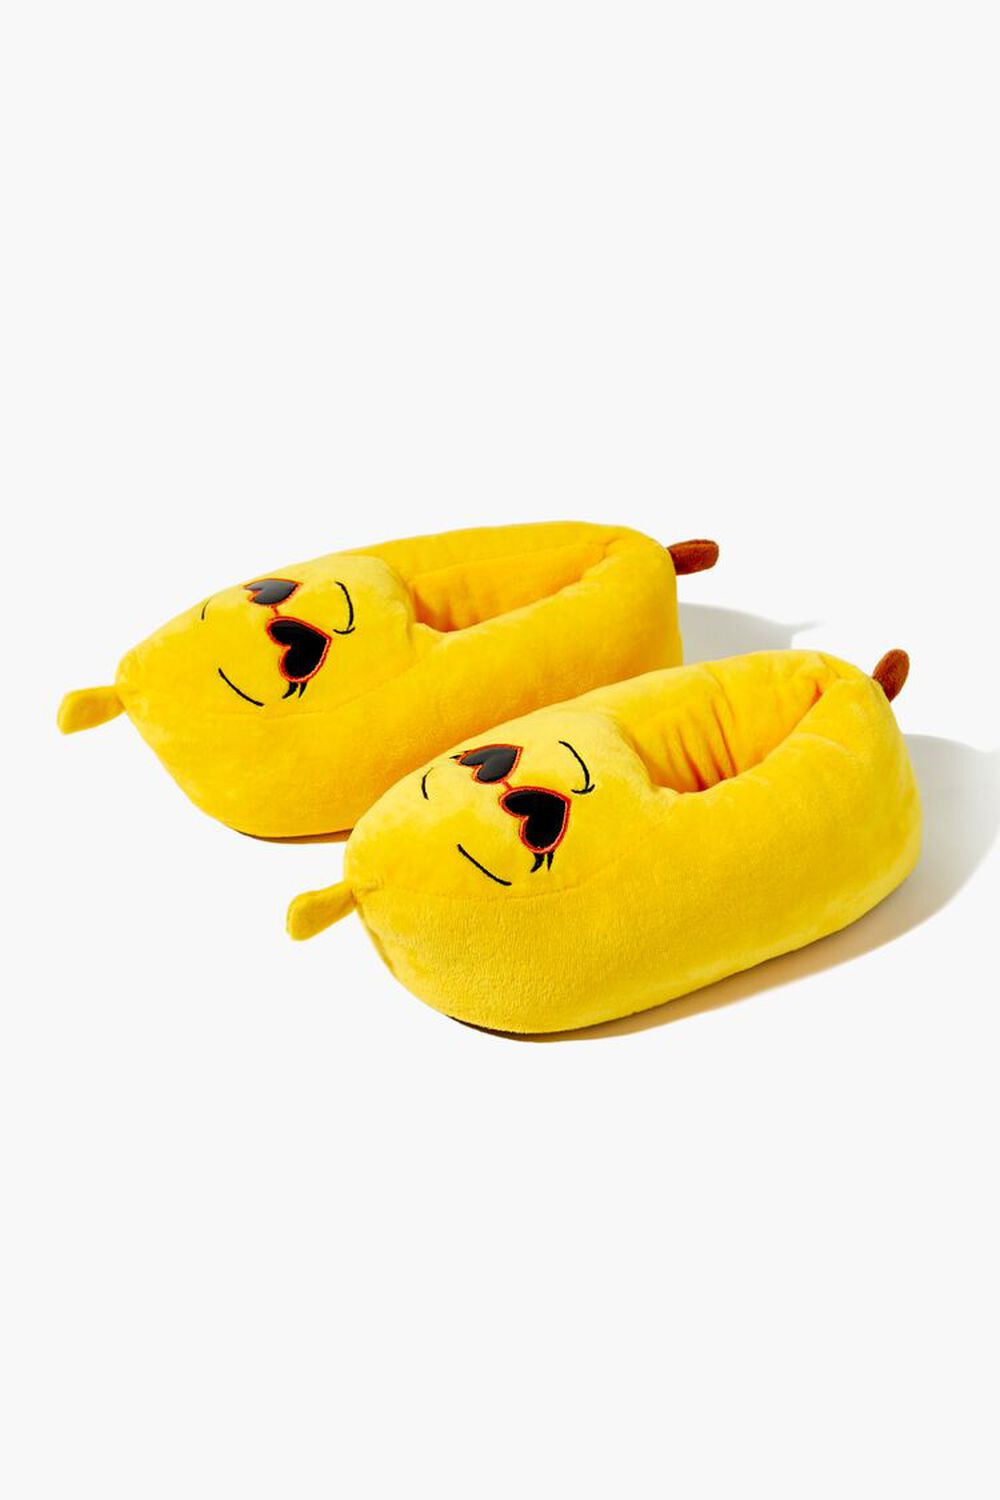 YELLOW Embroidered Banana House Slippers, image 1